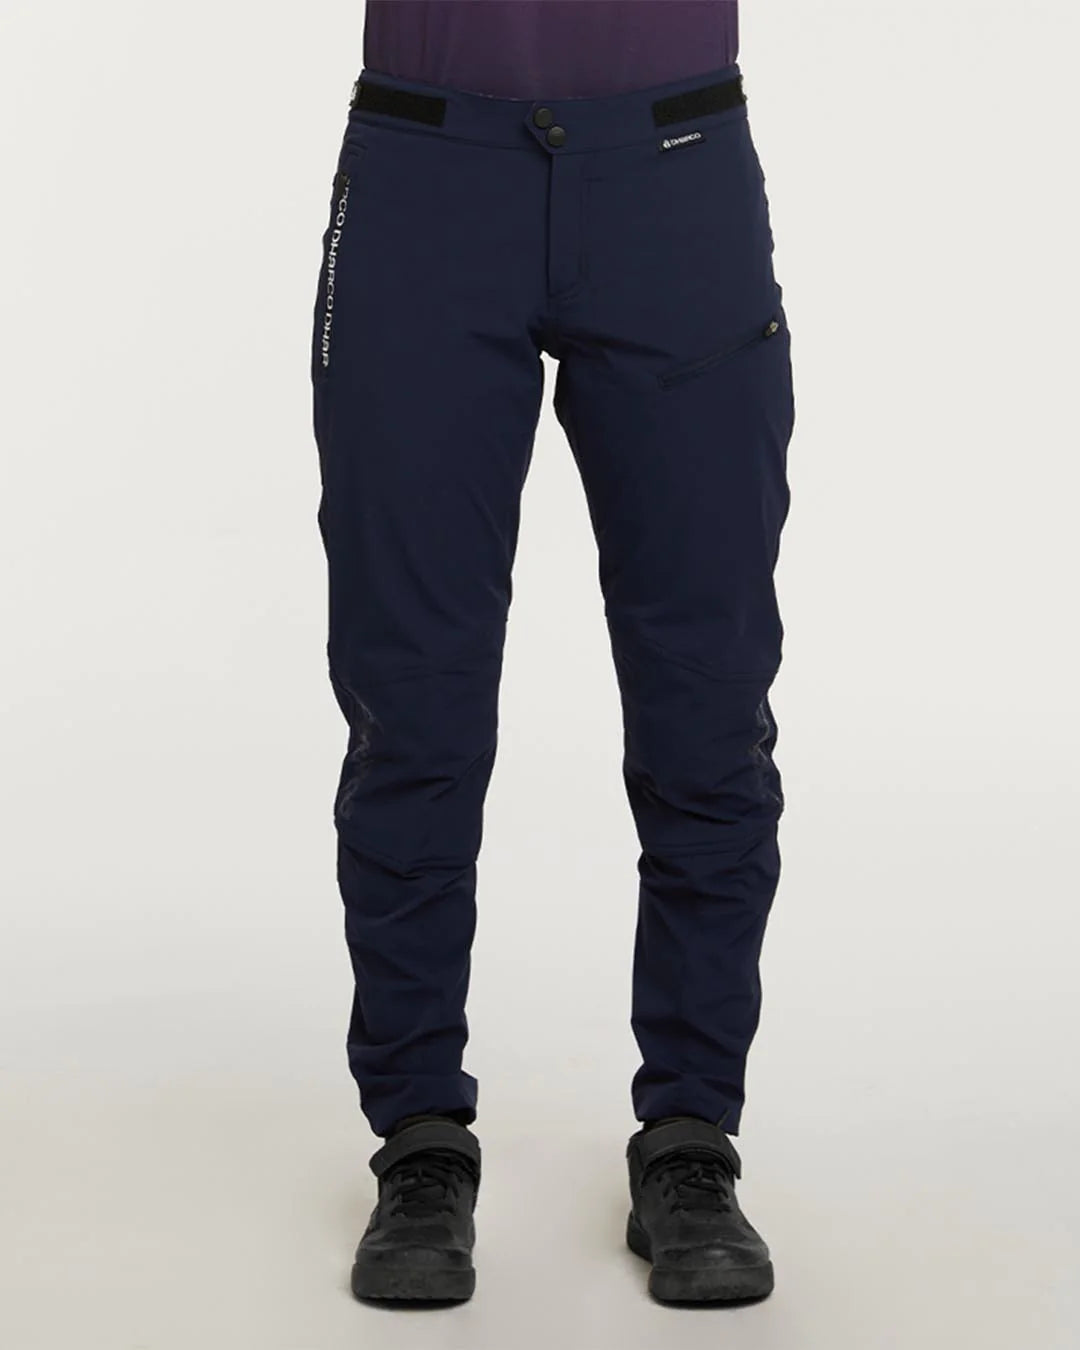 FIT GUIDE GARMENT - MENS PANTS - DHaRCO Clothing